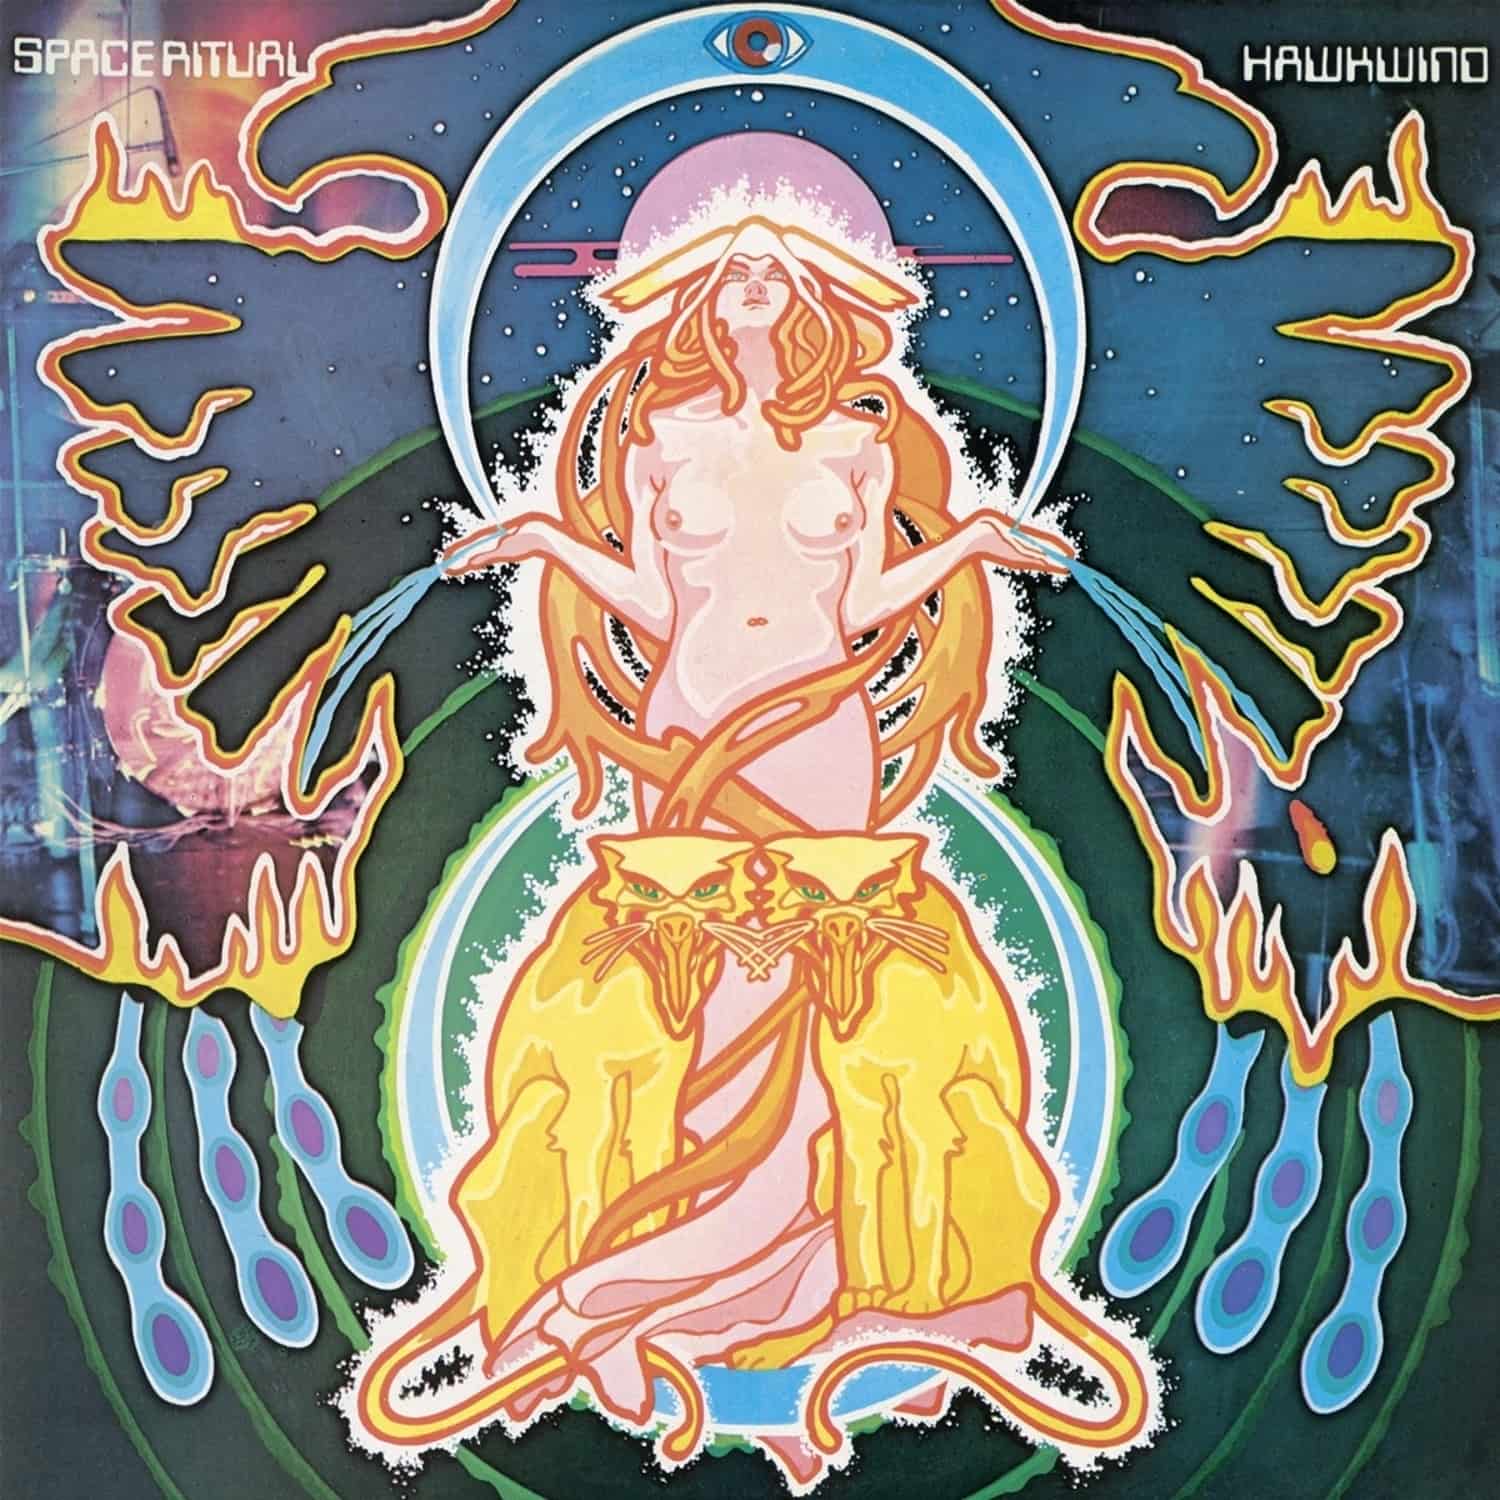 Hawkwind - SPACE RITUAL - 50TH ANNIVERSARY DELUXE DOUBLE 